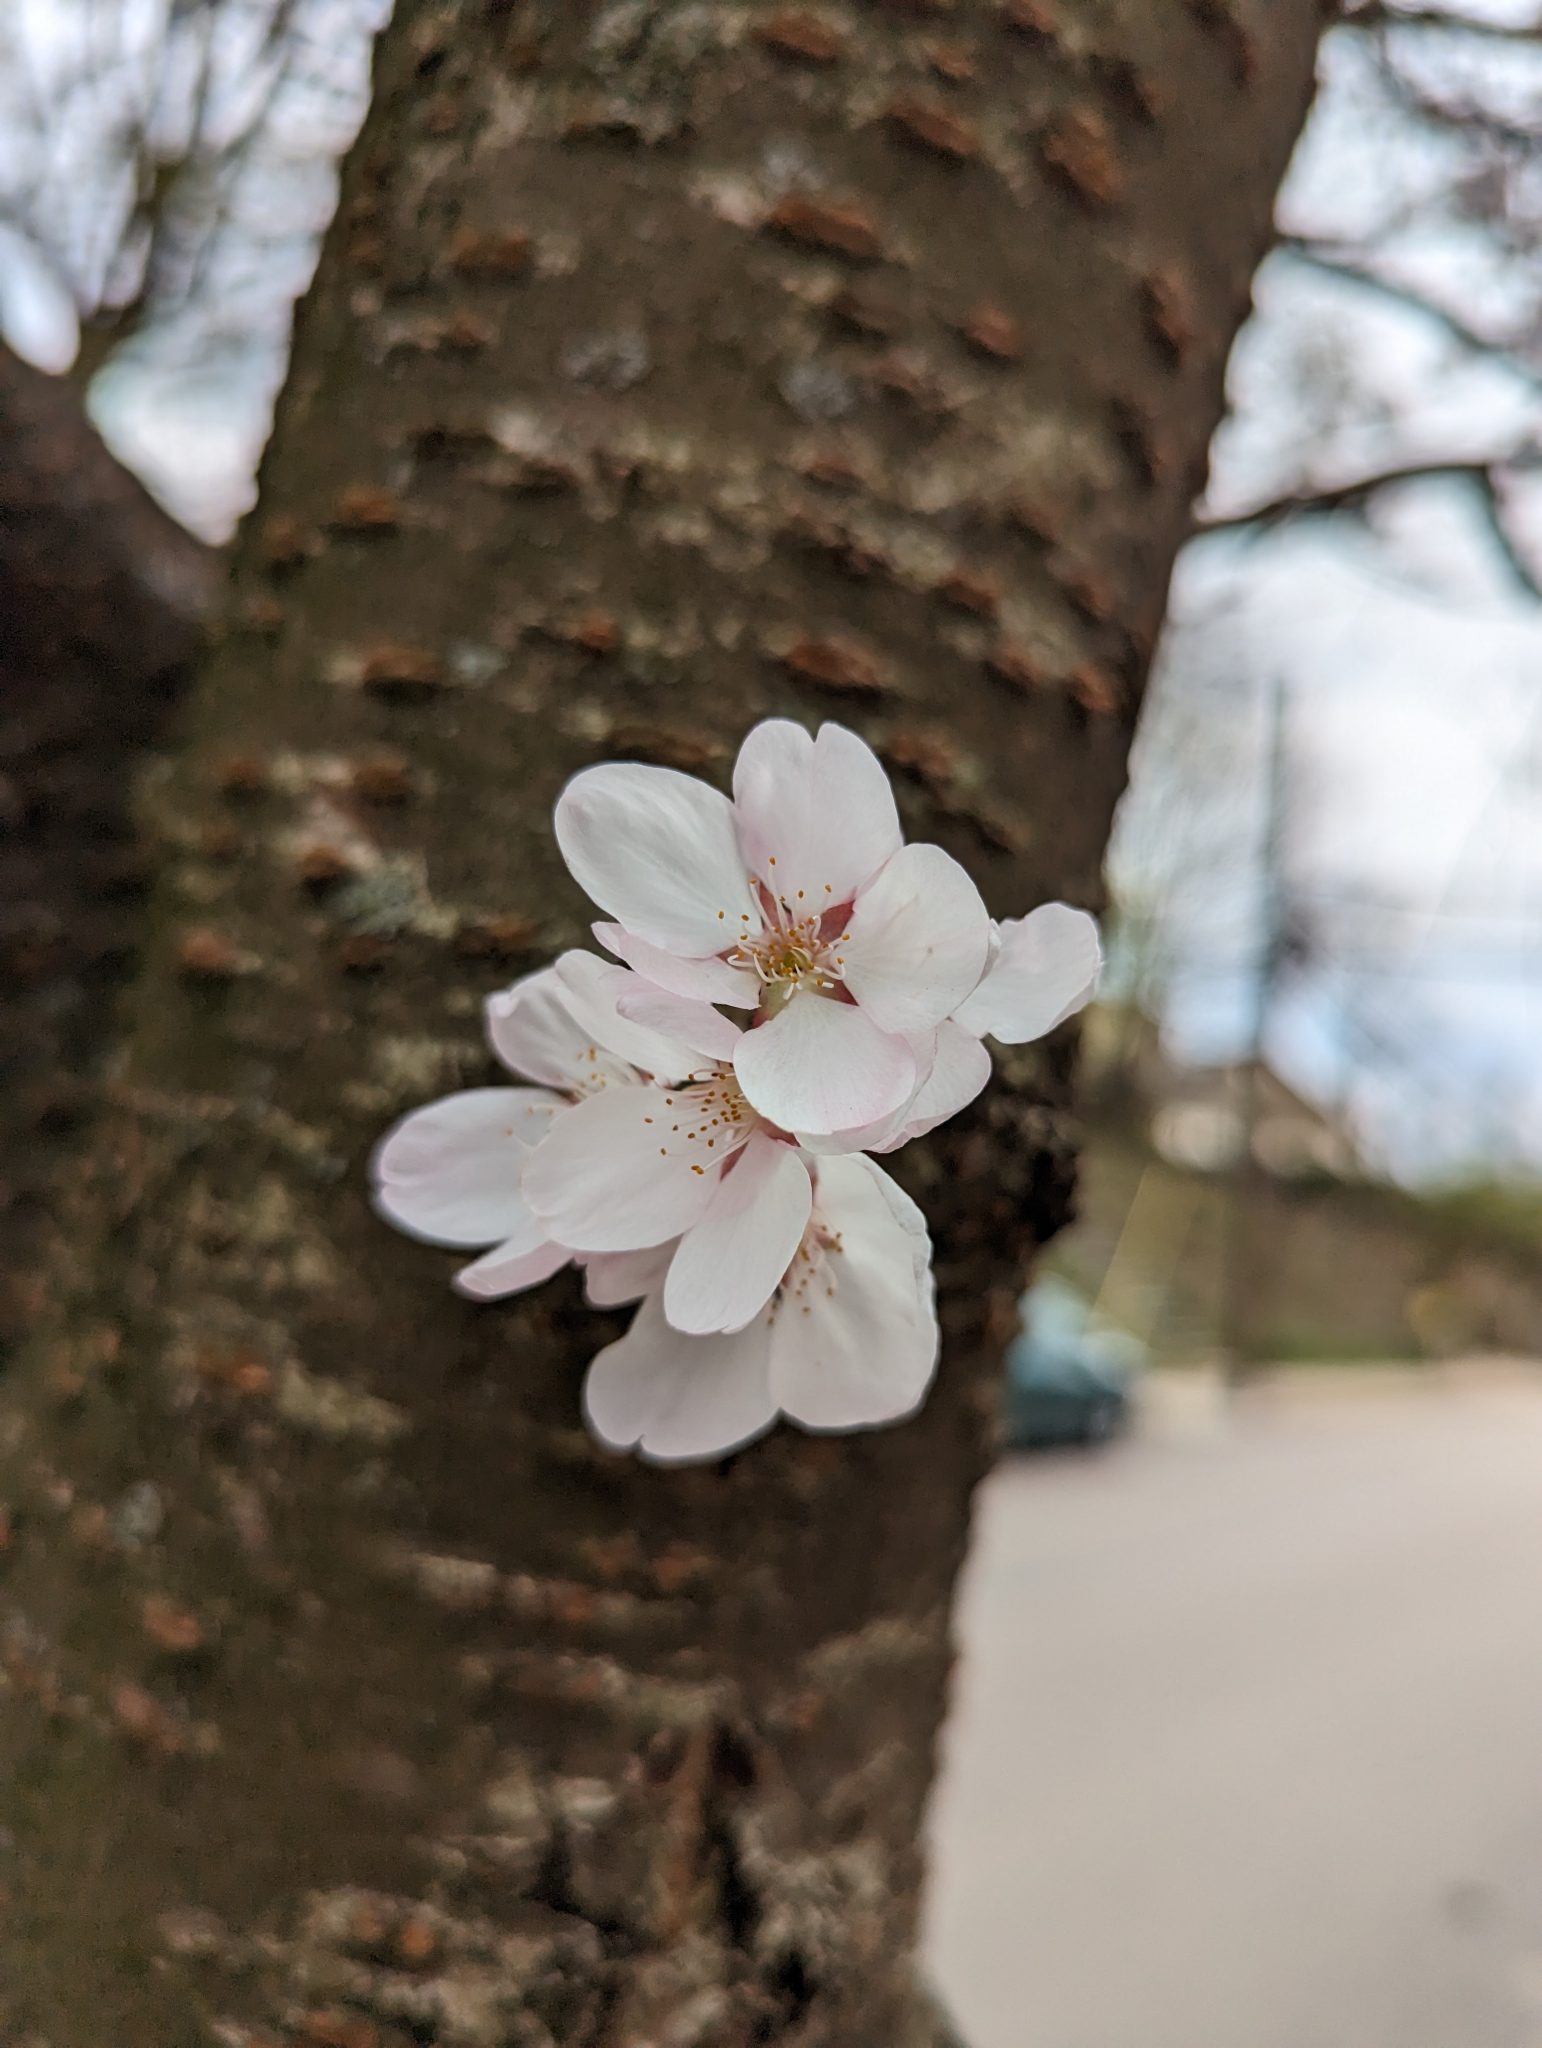 Two cherry blossoms on cherry tree trunk